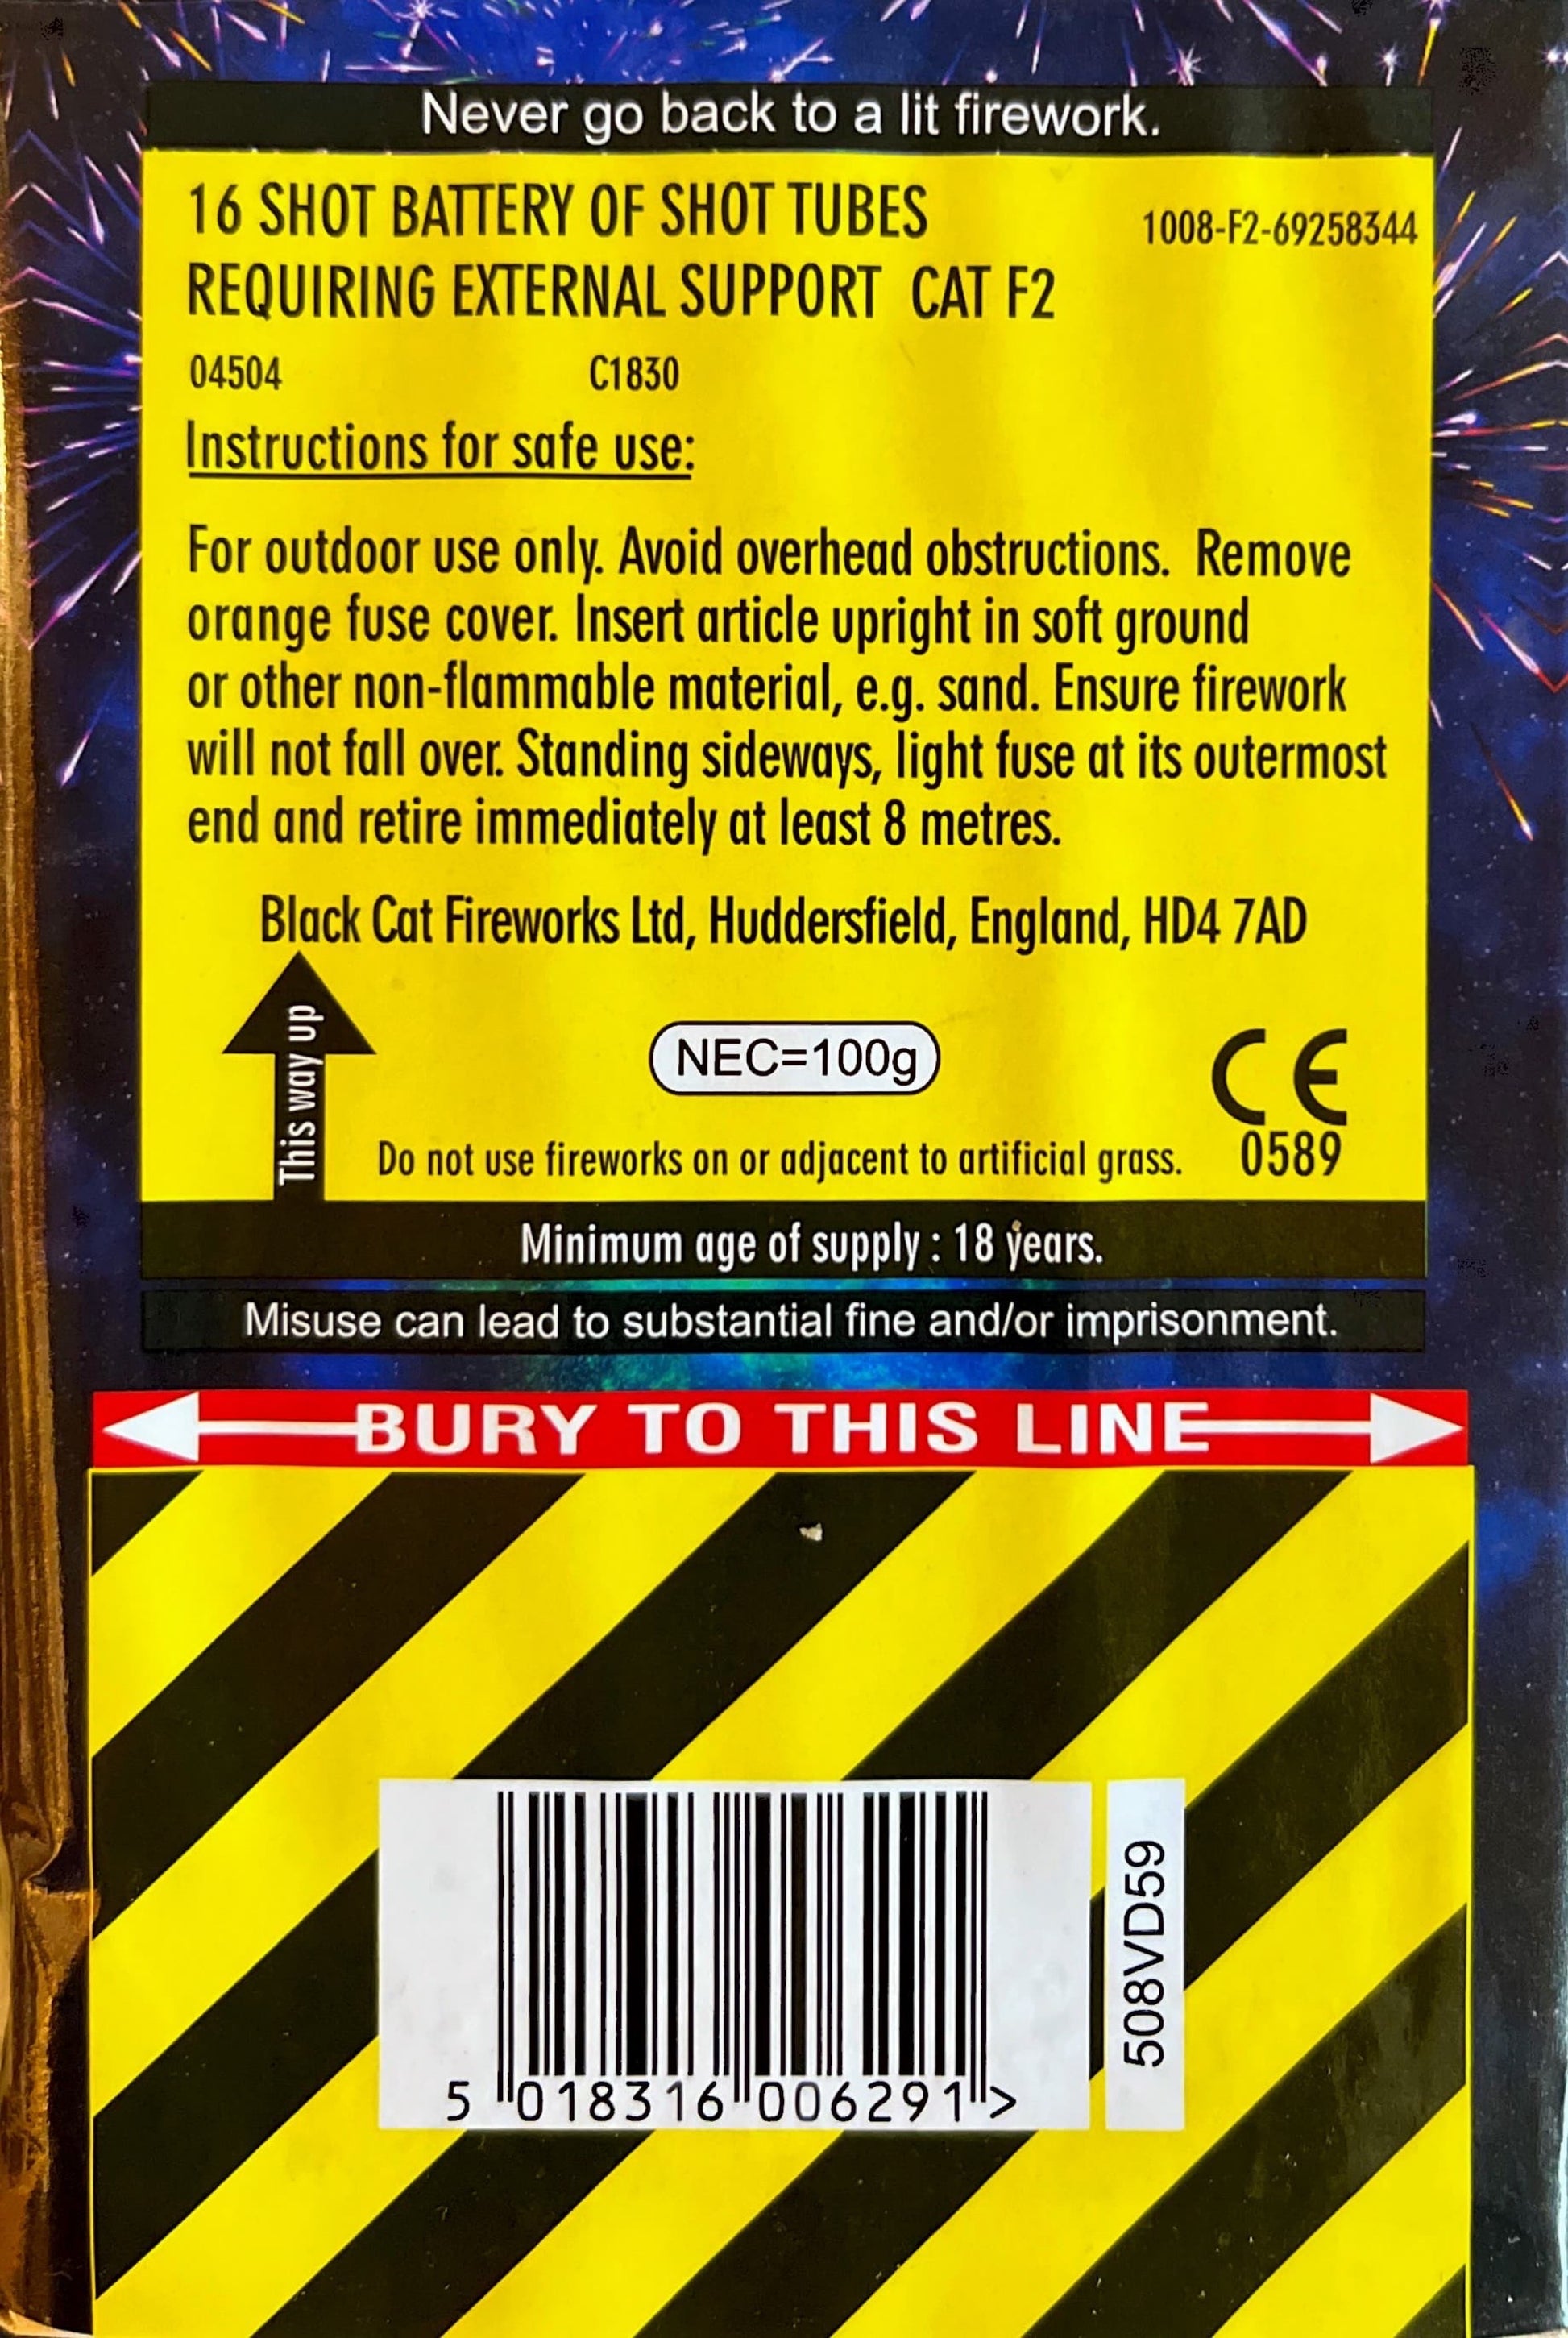 Avatar by Standard Fireworks Instructions